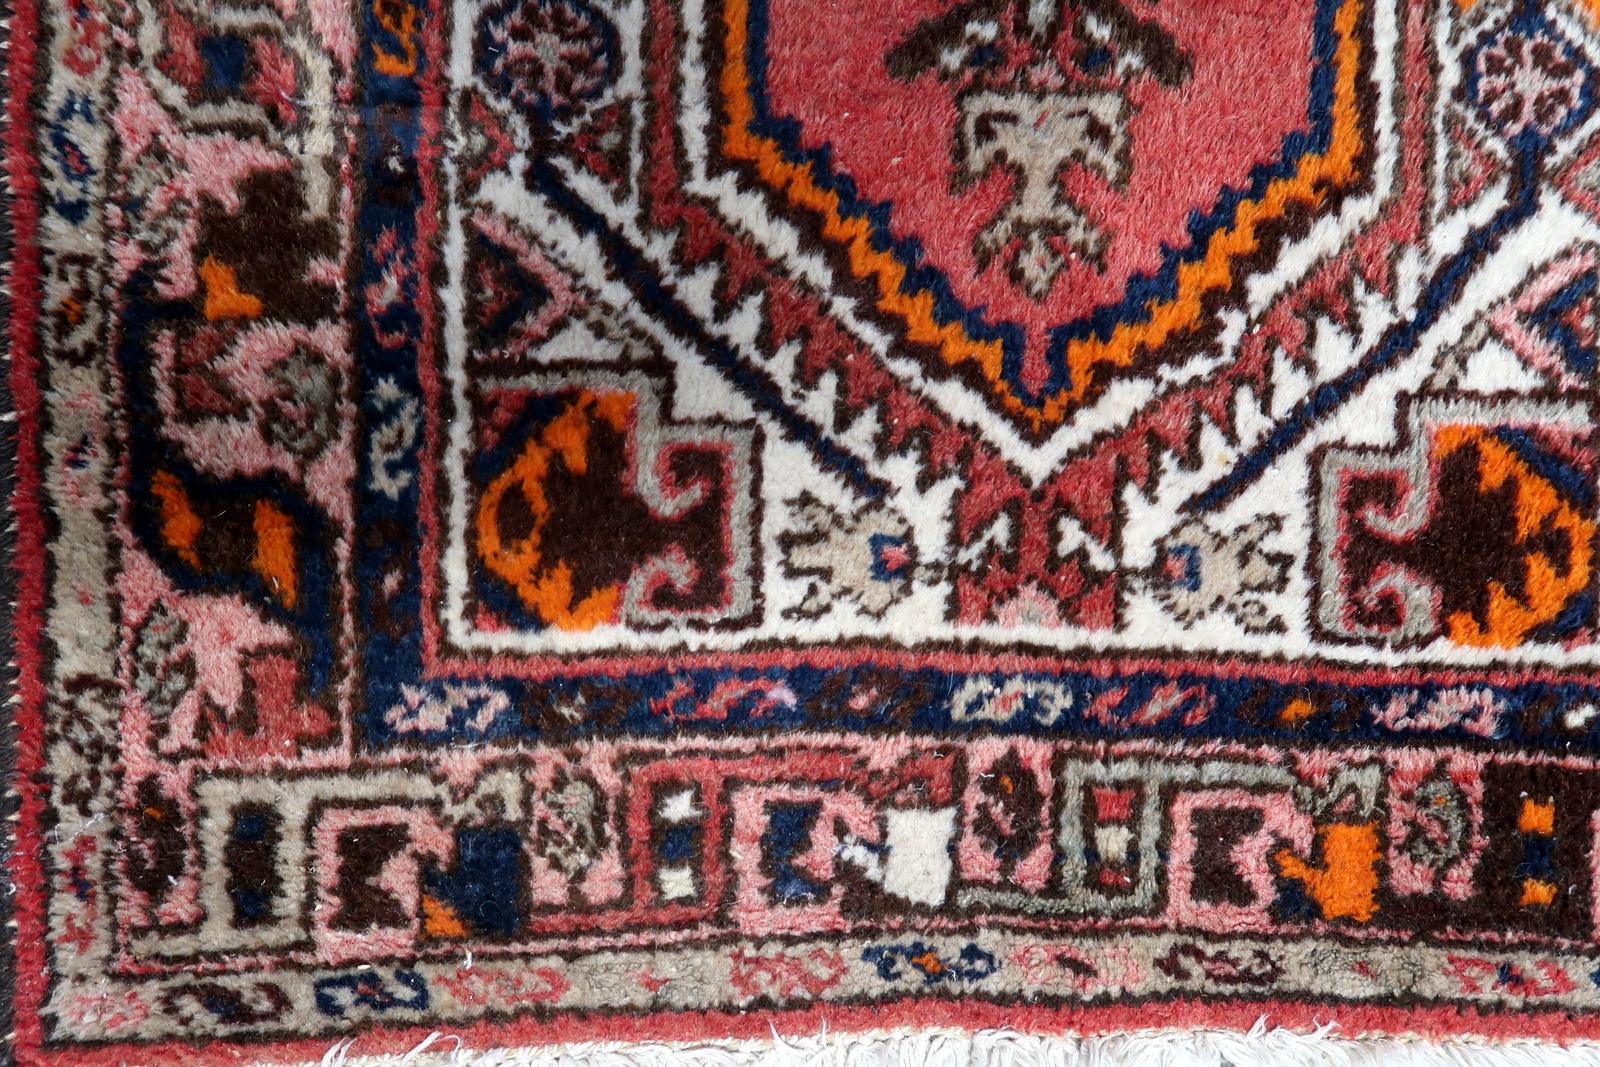 Introducing our Handmade Vintage Persian Hamadan Rug from the 1970s. This exquisite rug showcases a traditional design with a large geometric medallion, making it a captivating centerpiece for any room.

Crafted with care, this rug is in original